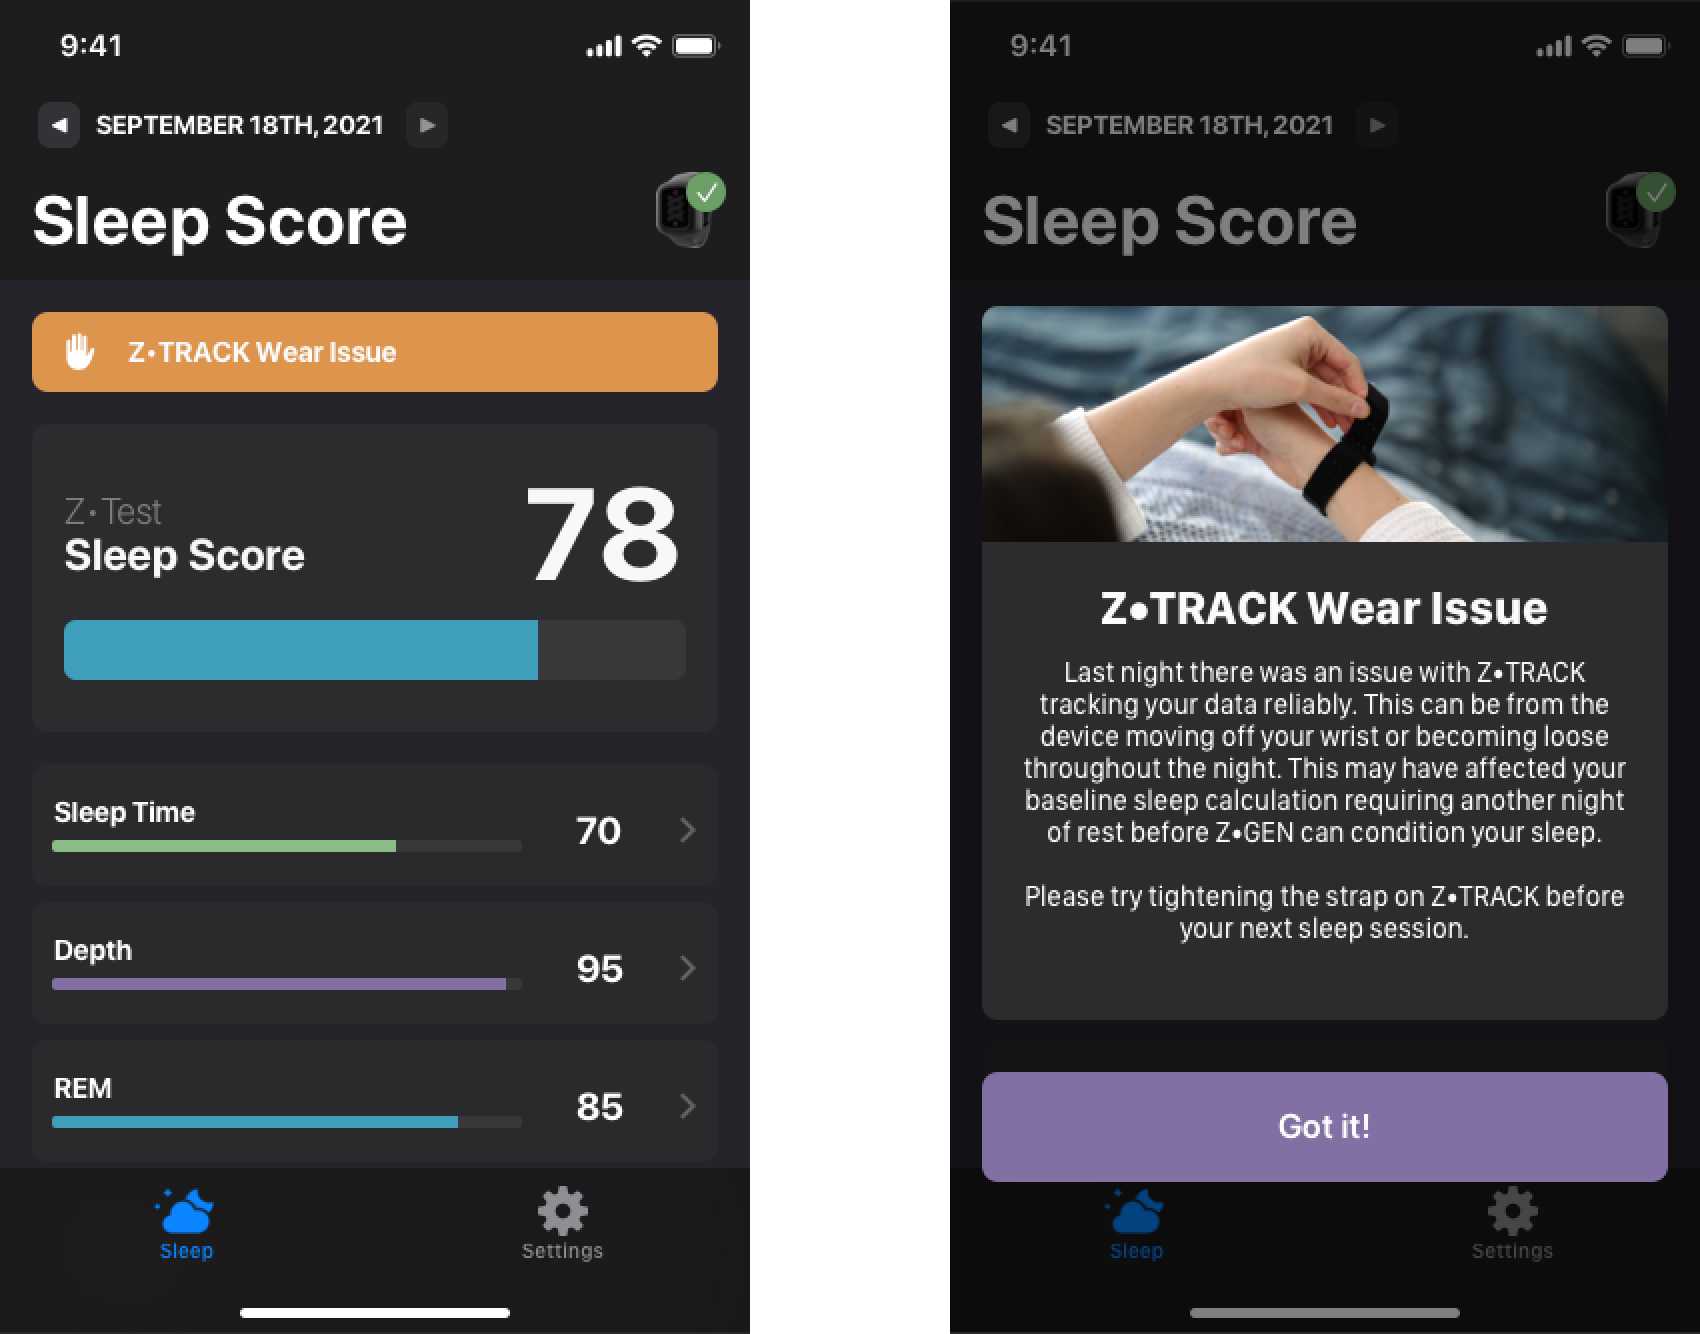 Poor fitting sleep tracker causing faulty readings and scores